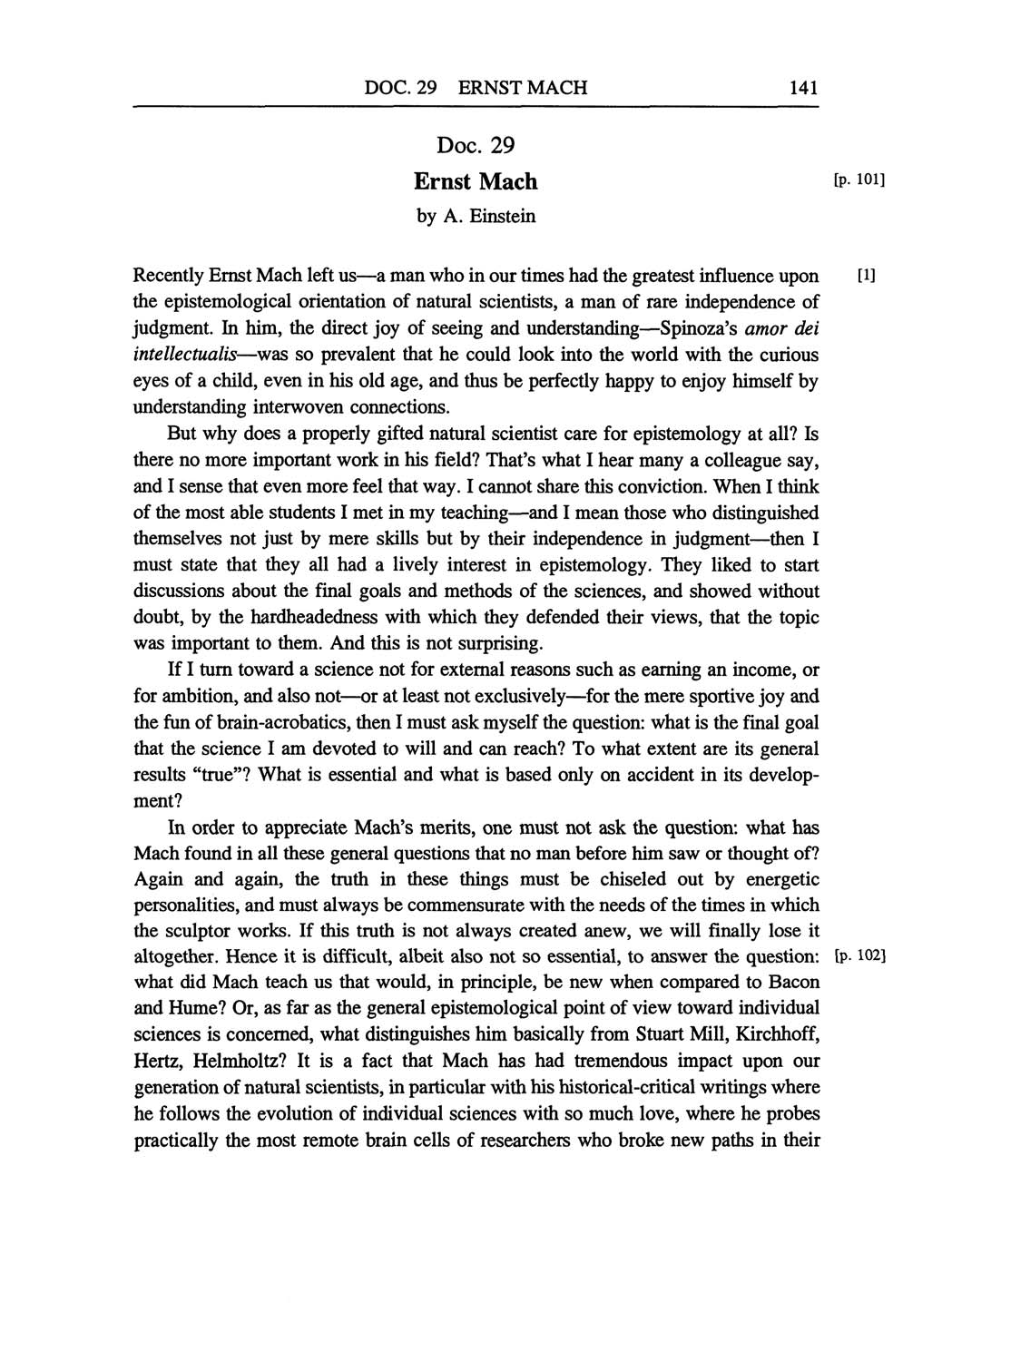 Volume 6: The Berlin Years: Writings, 1914-1917 (English translation supplement) page 141